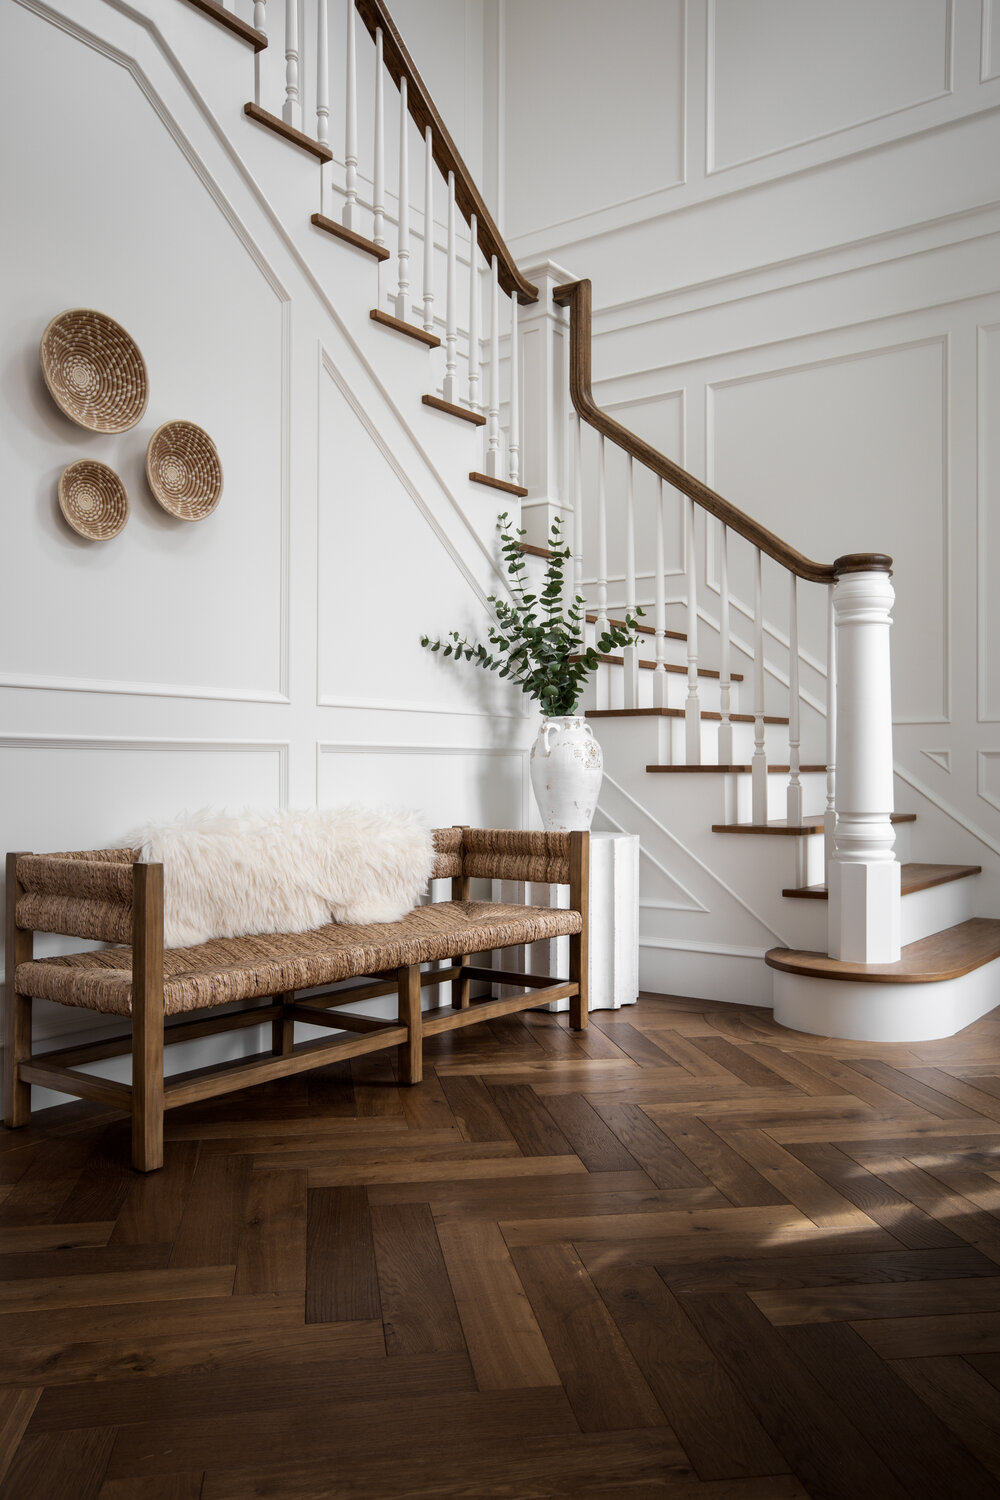 Staircase in beautiful French country home with interior design by Jenny Martin Design. #frenchcountryhome #interiordesign